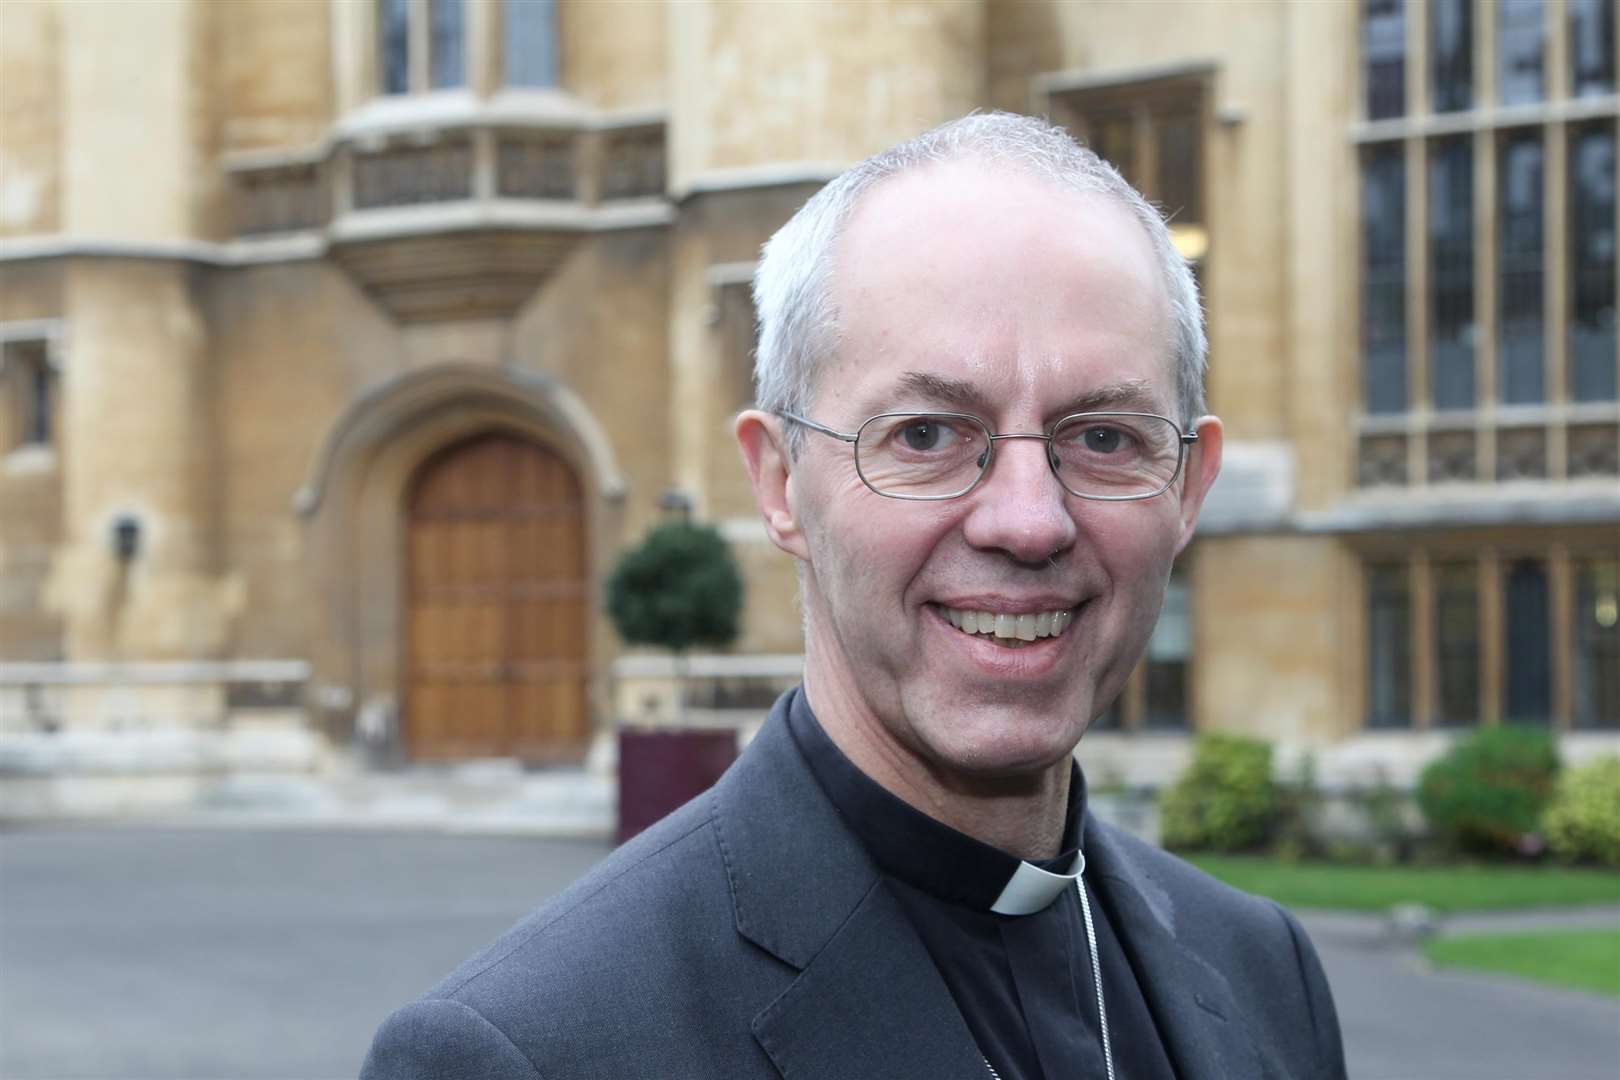 The Arhbishop of Canterbury, the Most Rev Justin Welby